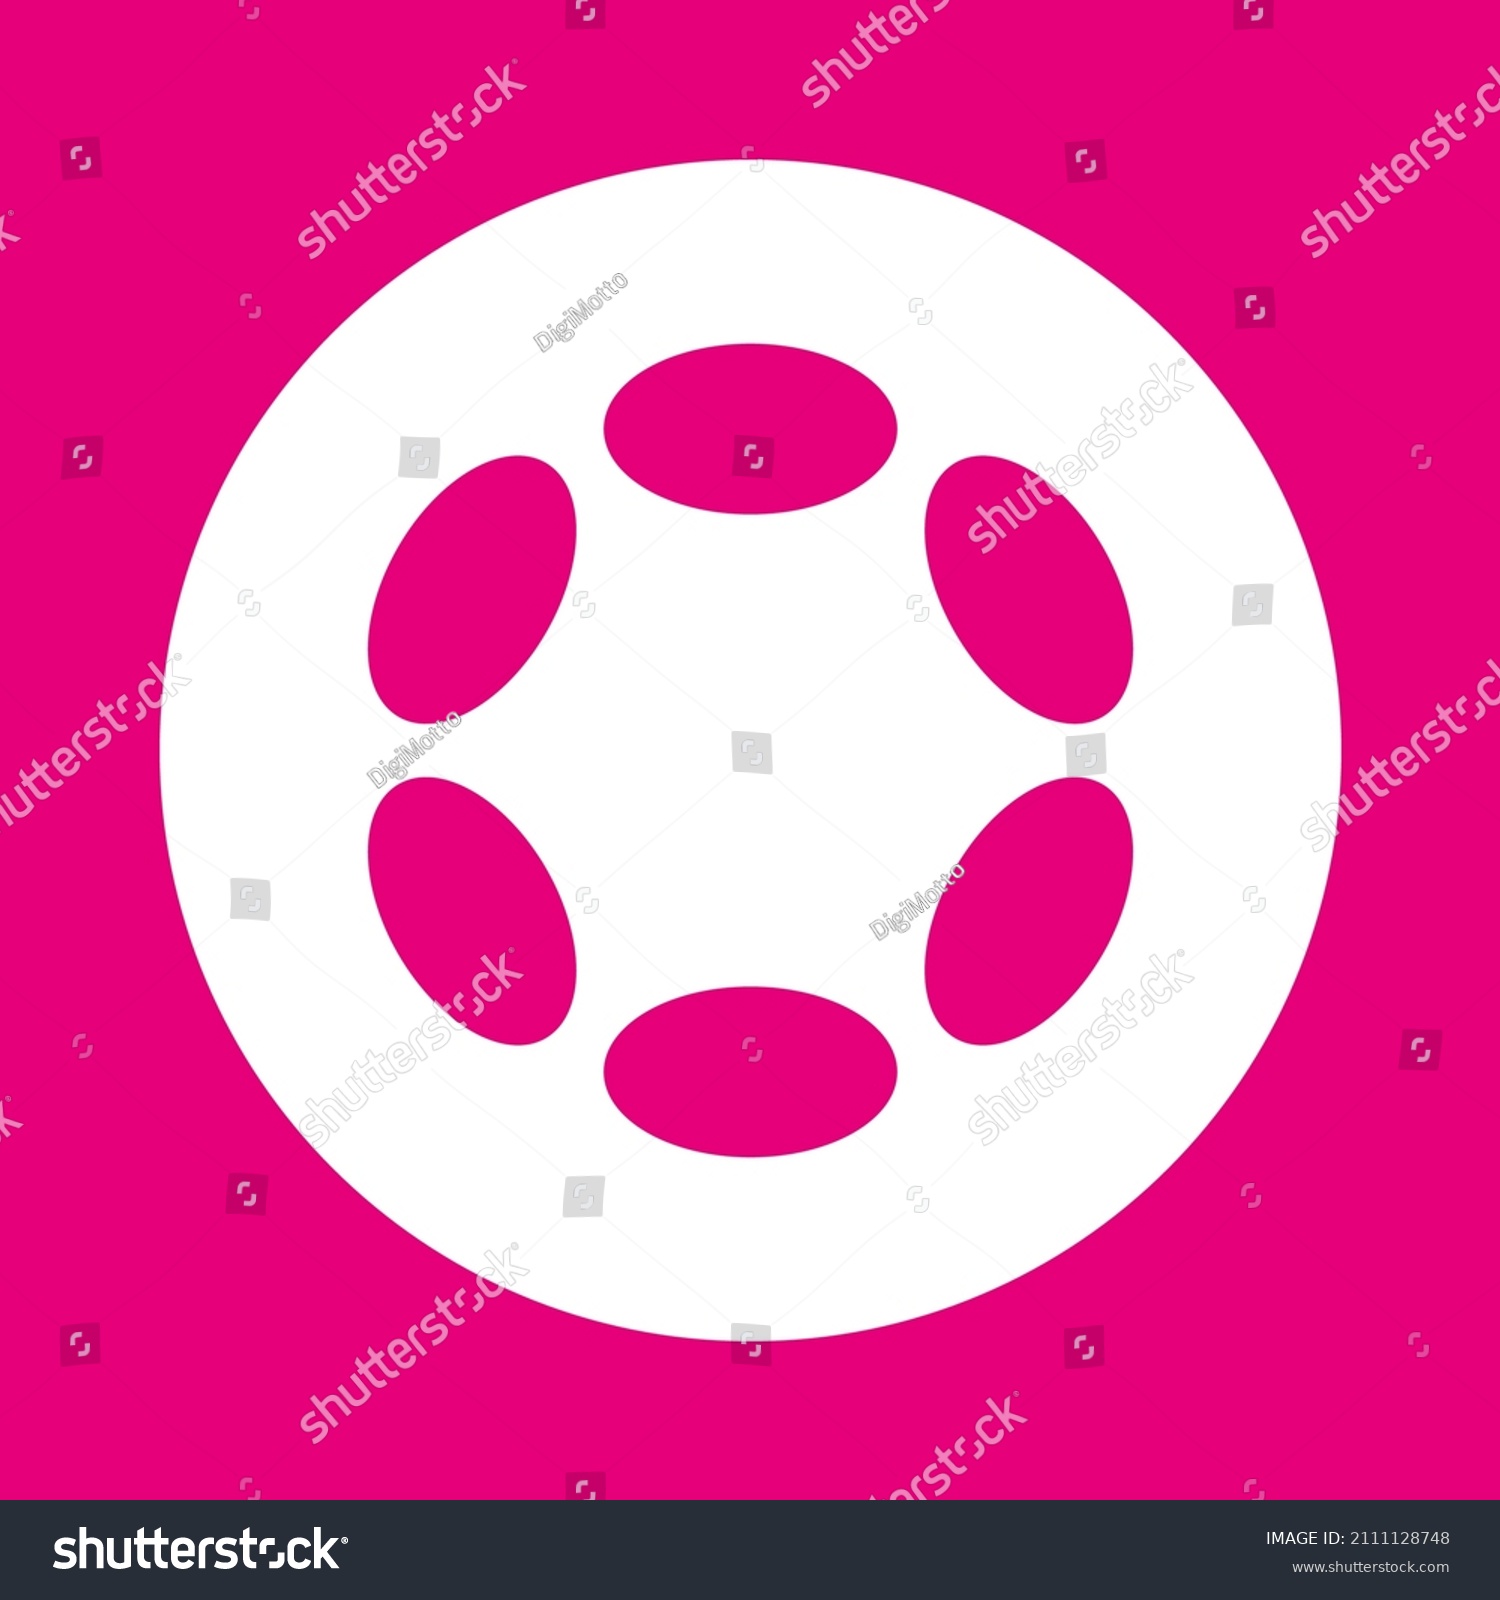 SVG of New Polkadot Coin Icon DOT Cryptocurrency logo vector illustration. Best used for T-shirts, mugs, posters, banners, social media and trading websites. svg